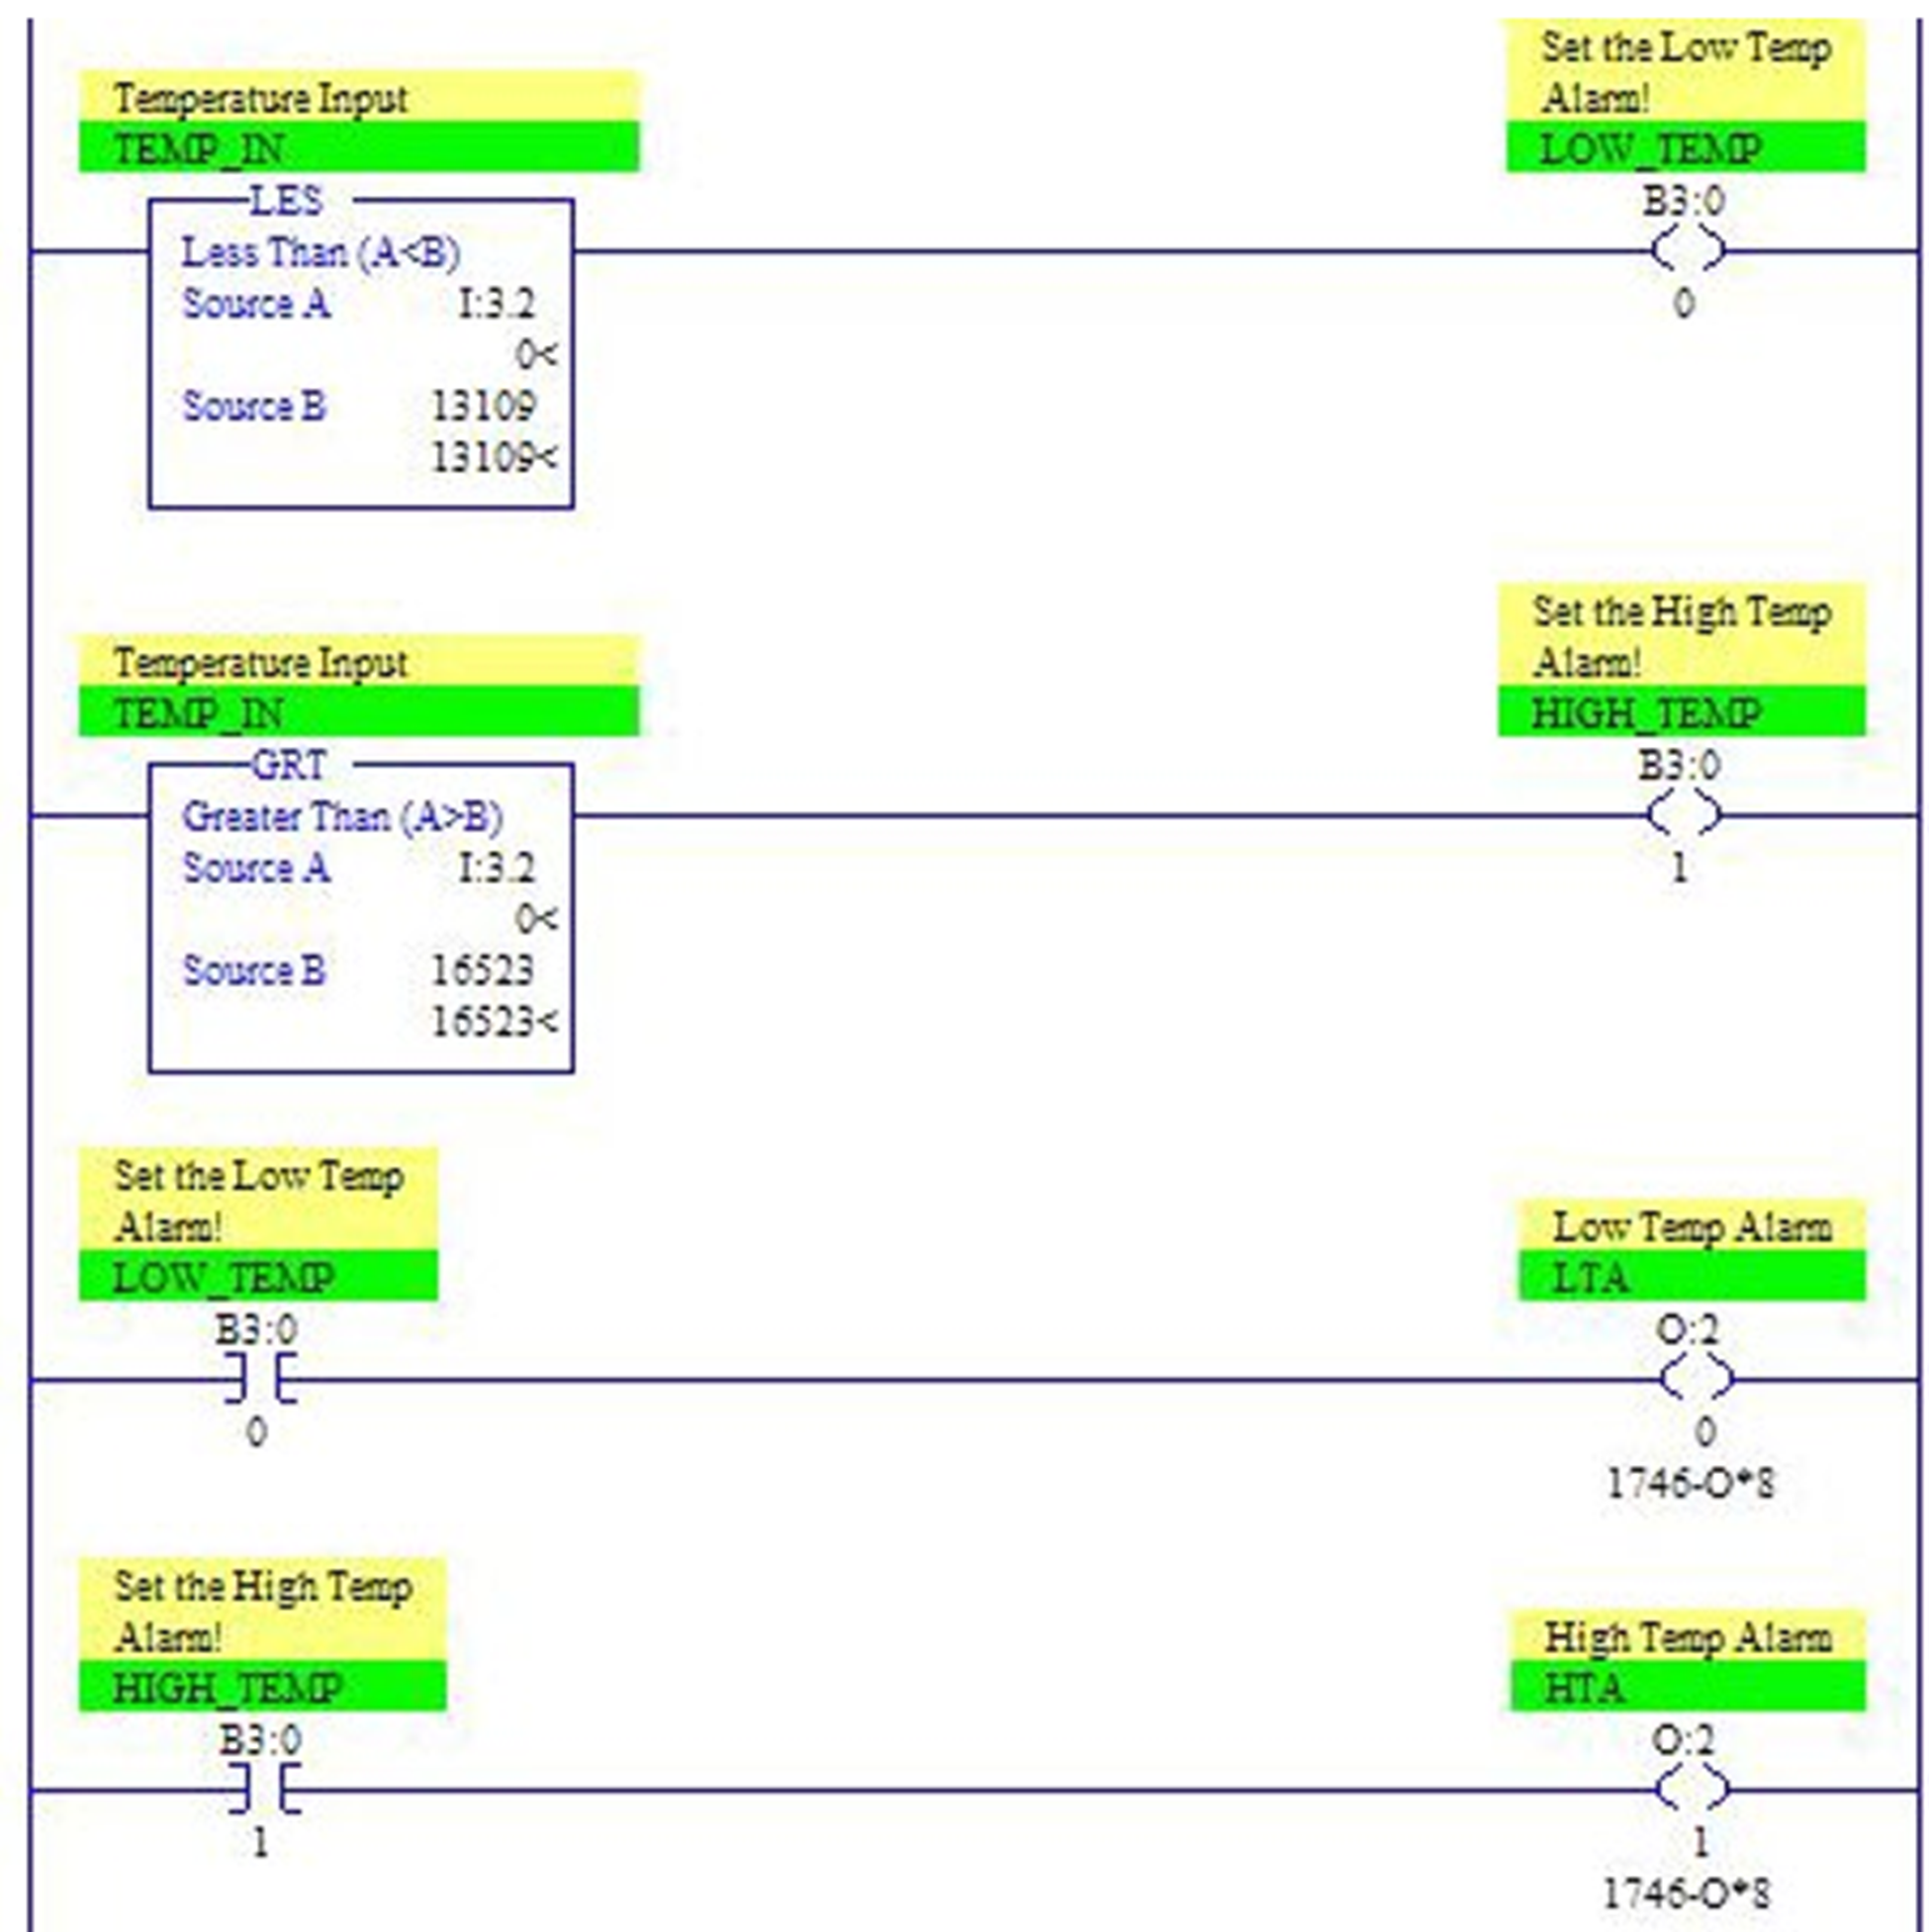 when are input branch instructions used as part of a ladder logic program?